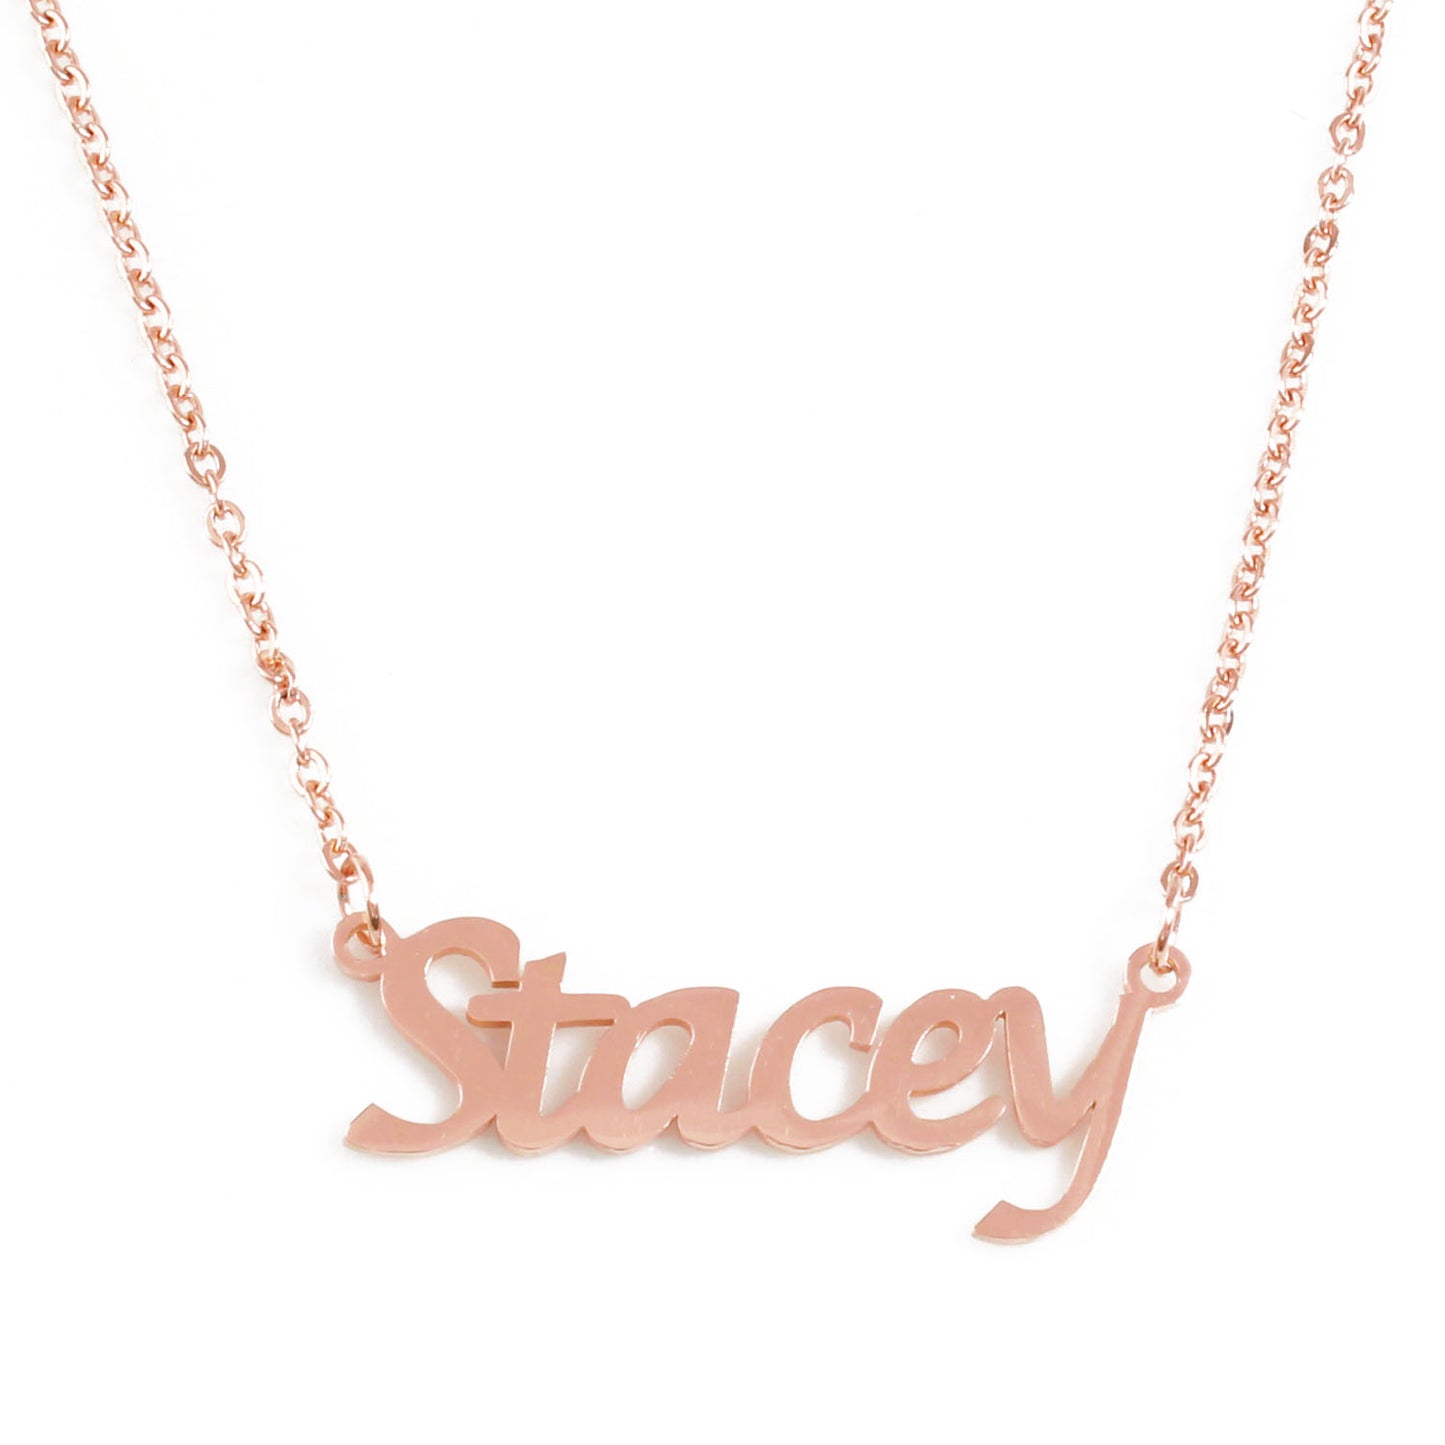 Stacey Name Necklace